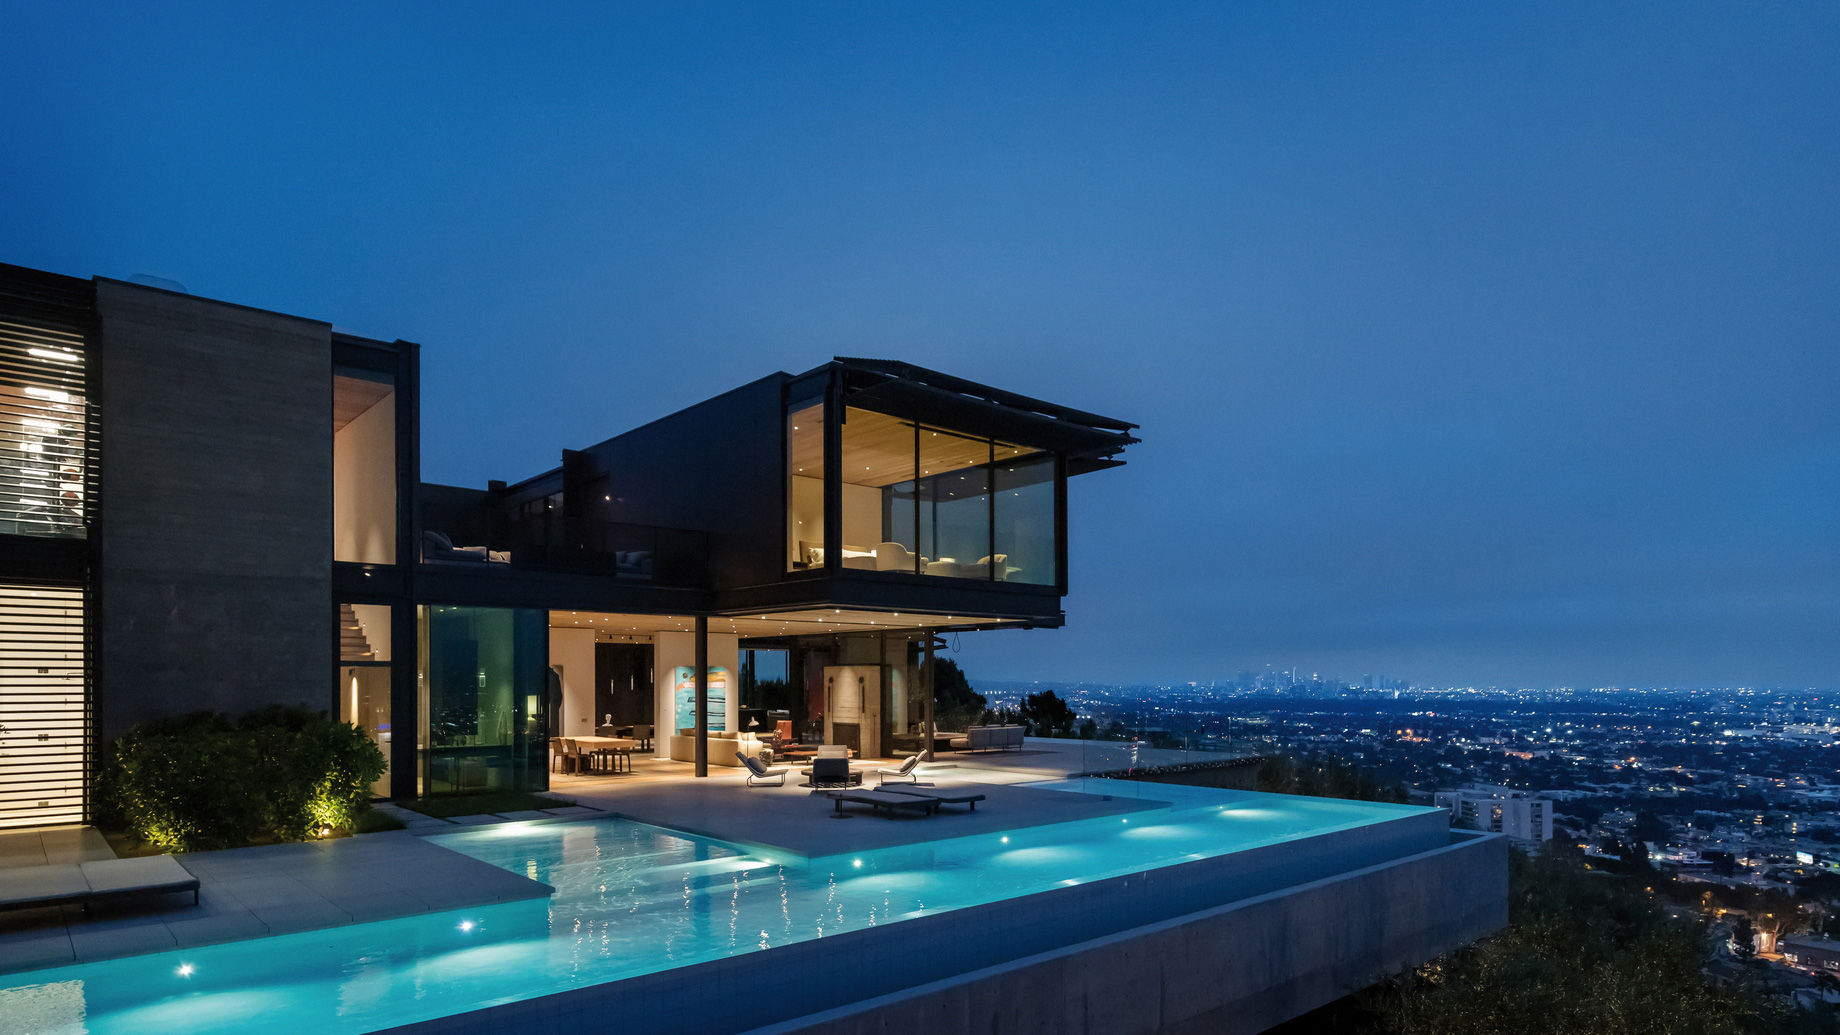 Collywood House – 1301 Collingwood Pl, Los Angeles, CA, USA – West Hollywood Modern Contemporary Home – West Hollywood Modern Contemporary Home